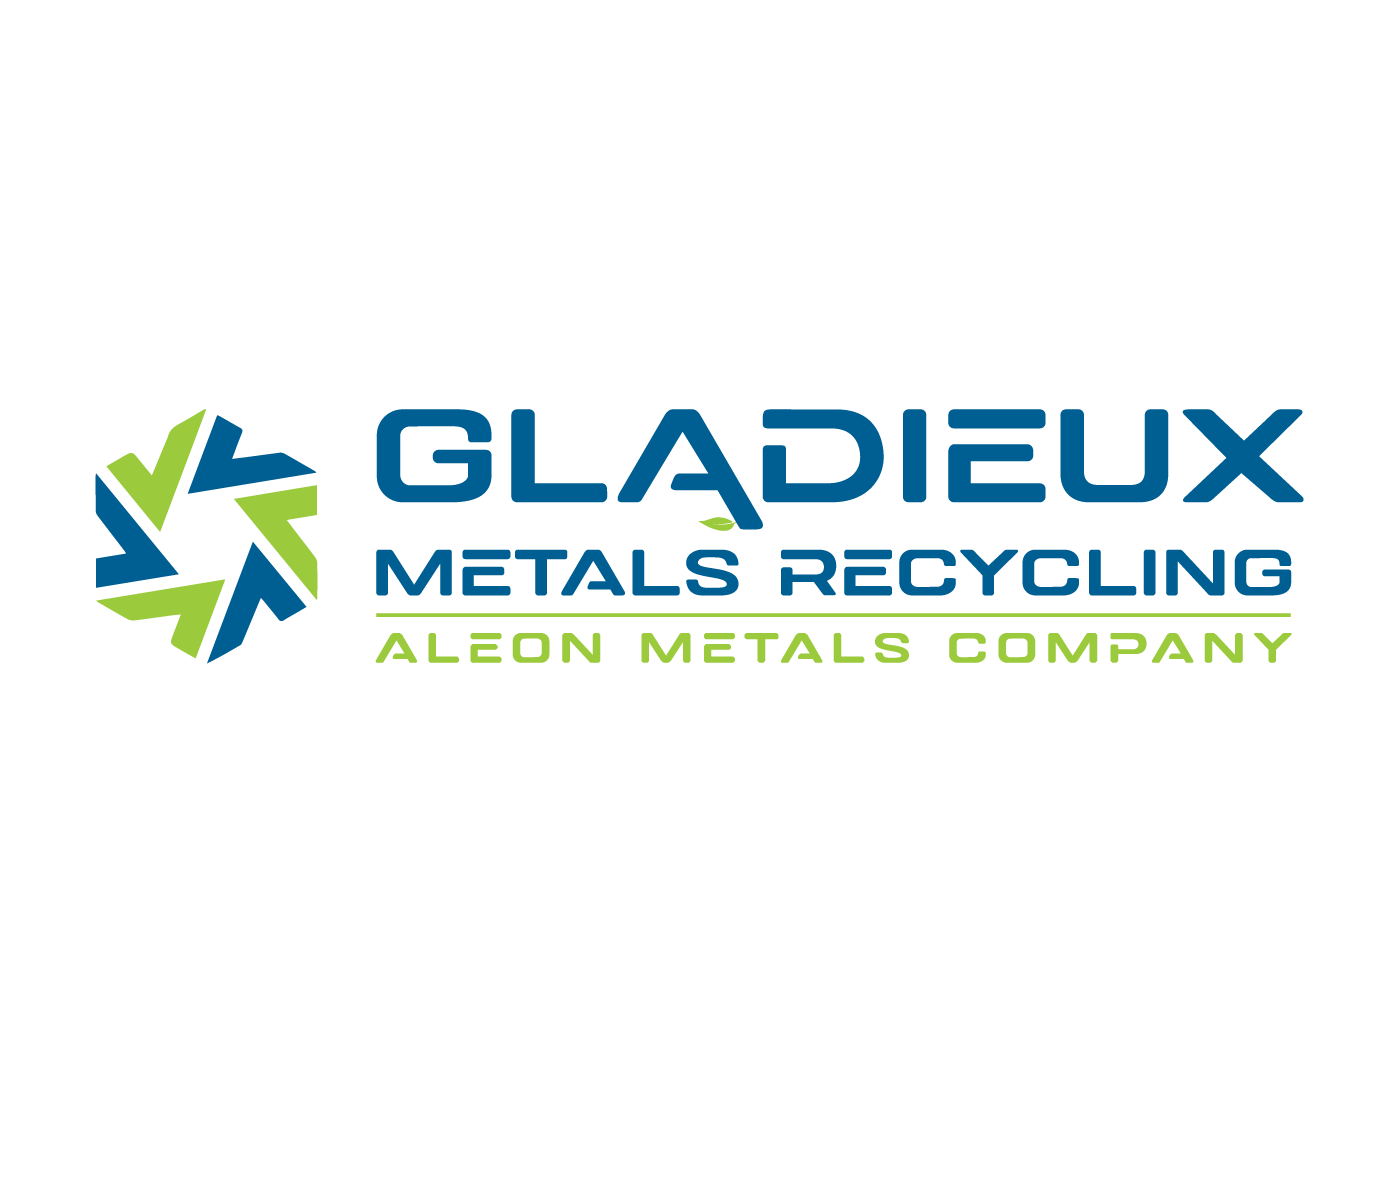 Gladieux Metals Recycling NEW LOGO